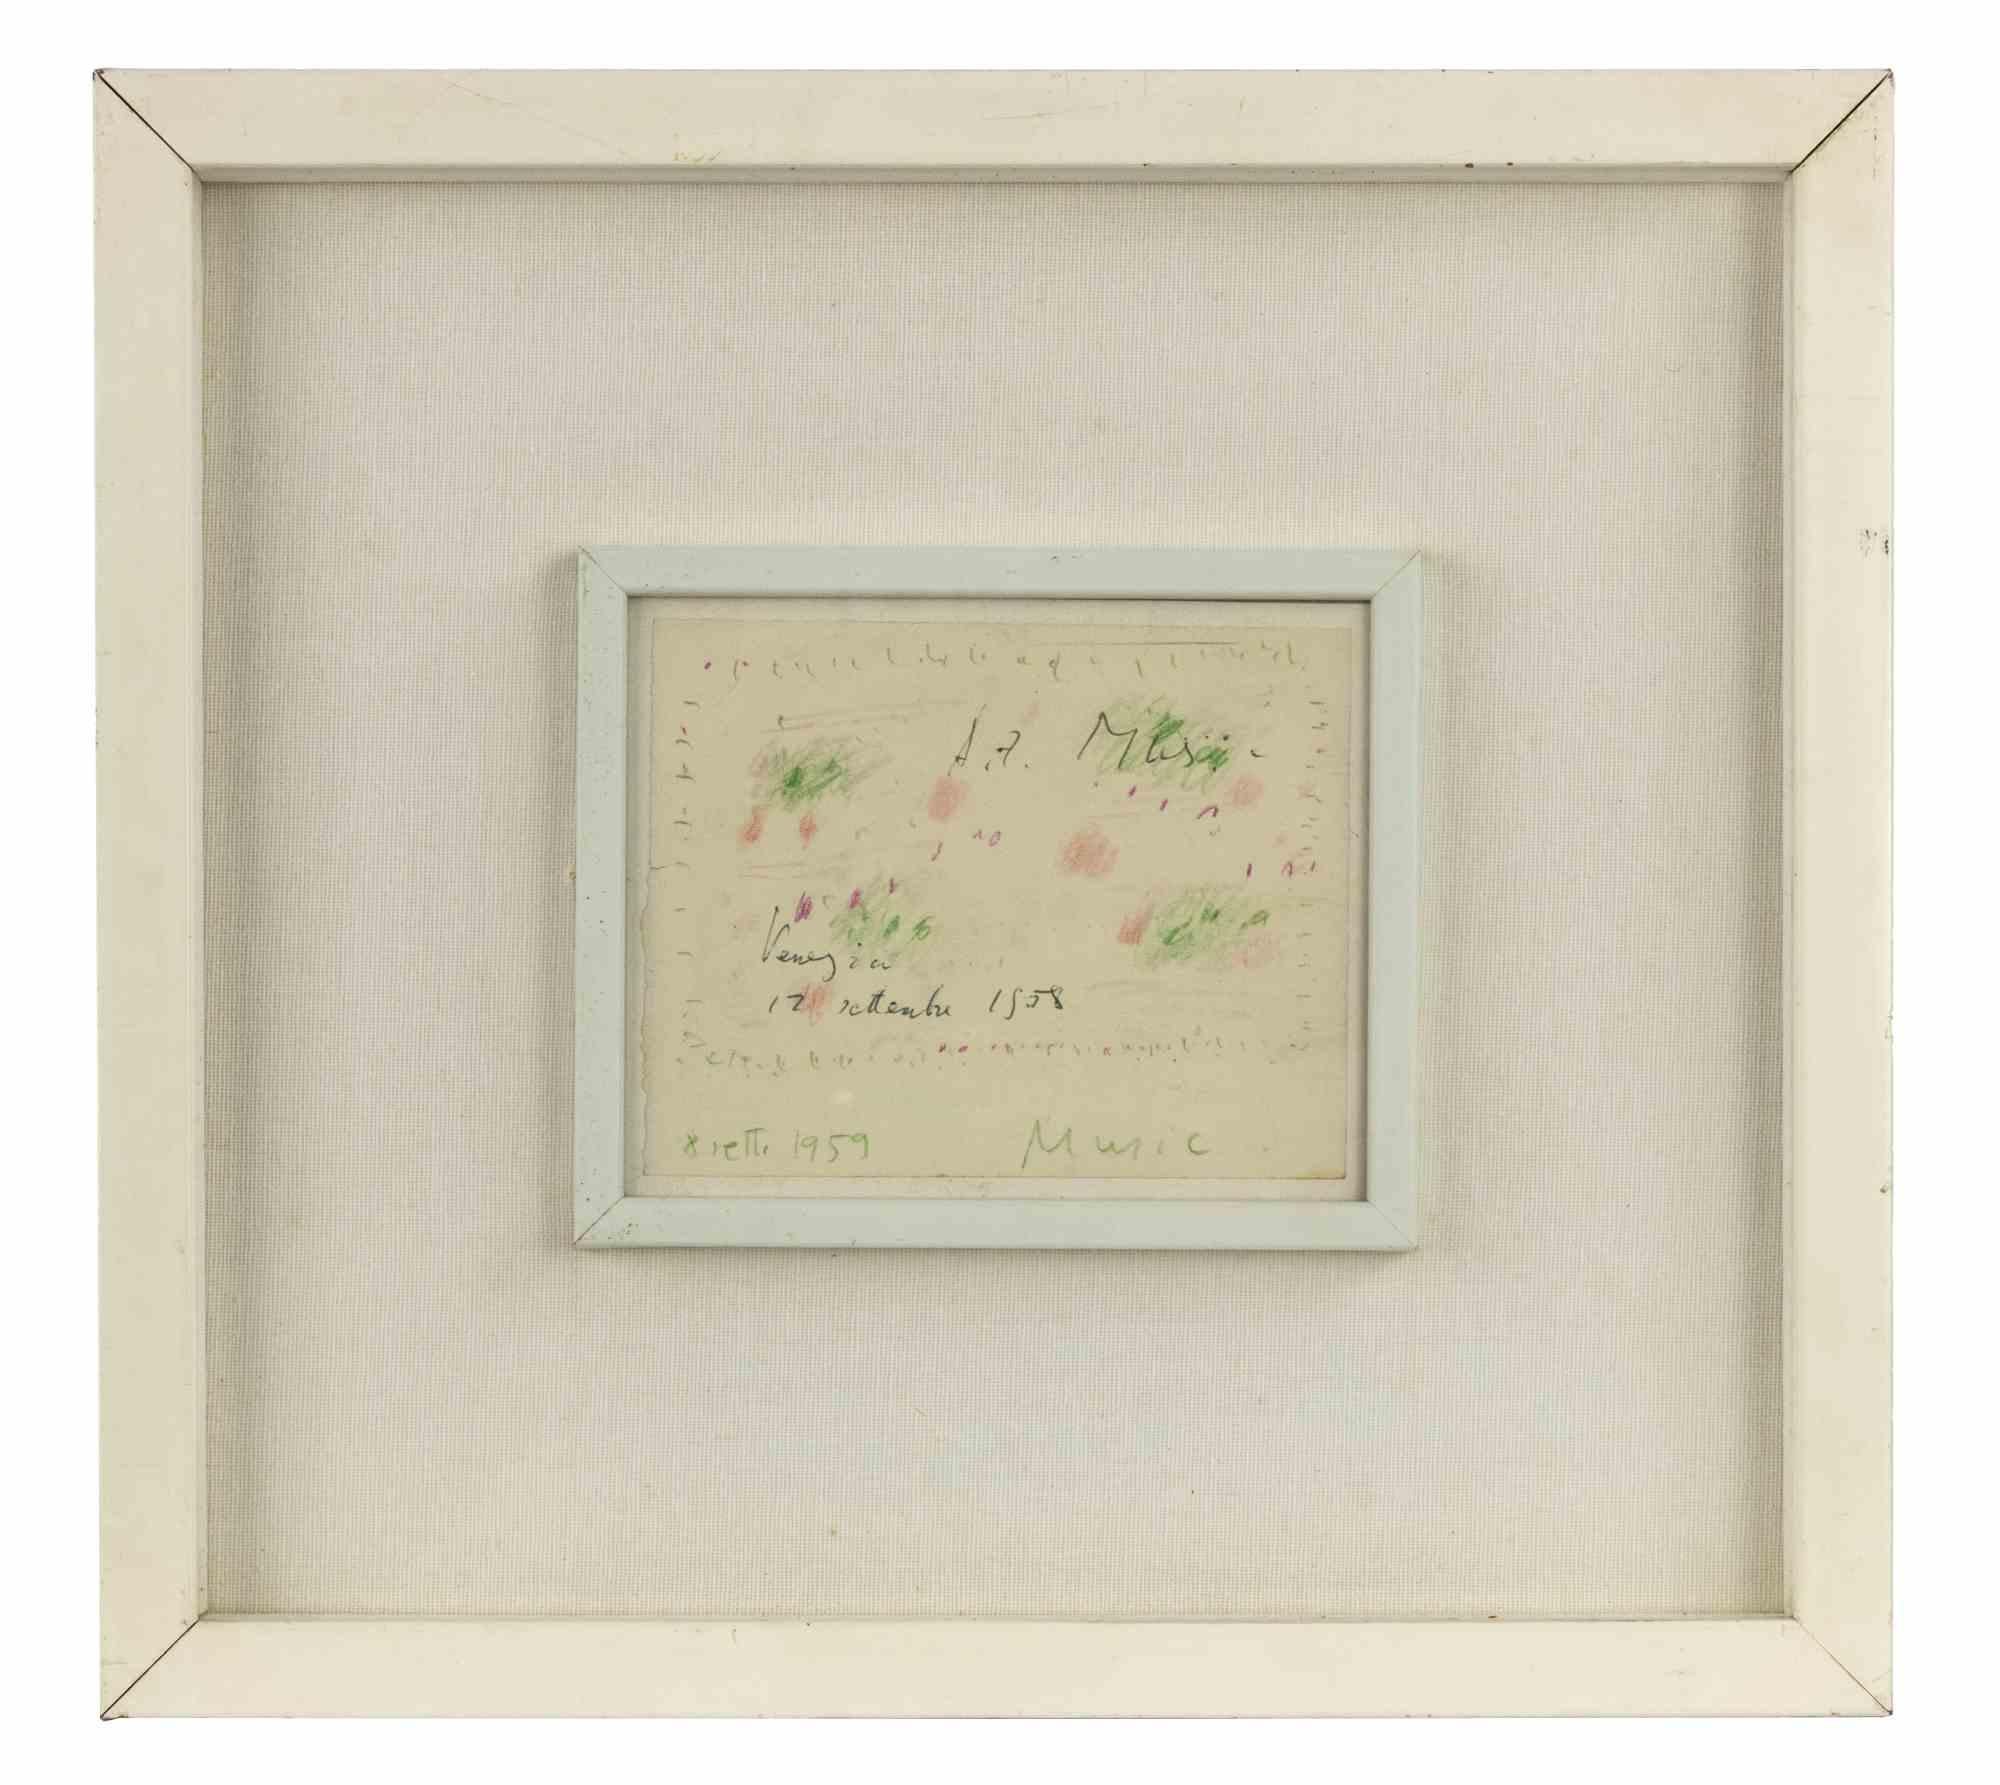 Venice is an original modern artwork realized by Zoran Mušic in 1959.

Mixed colored pastel drawing.

Includes frame.

Hand signed and dated on the lower margin.

Anton Zoran Mušic (12 February 1909 – 25 May 2005). Born in Gorizia in 1909, he